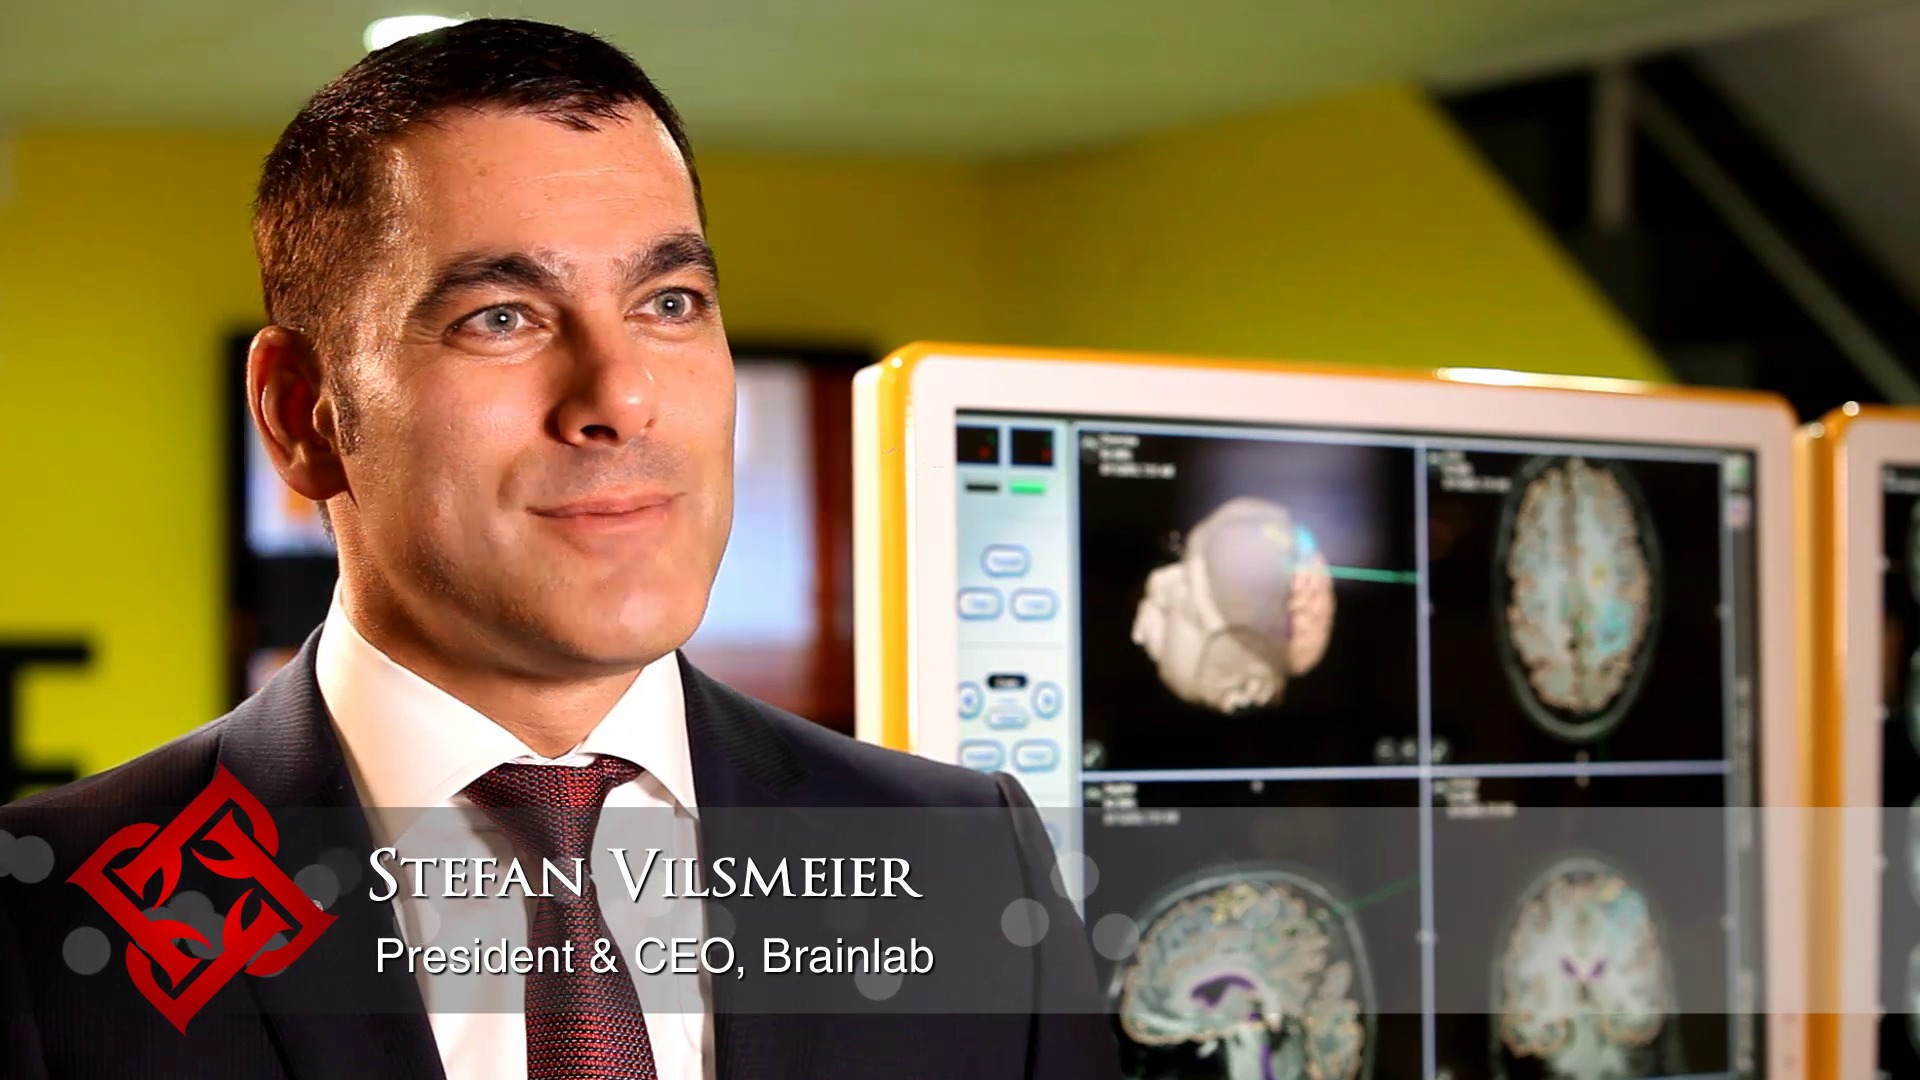 Brainlab President &amp; CEO Stefan Vilsmeier on the healthcare business in the Middle East - The Prospect Group - vlcsnap-2012-03-05-10h34m52s182